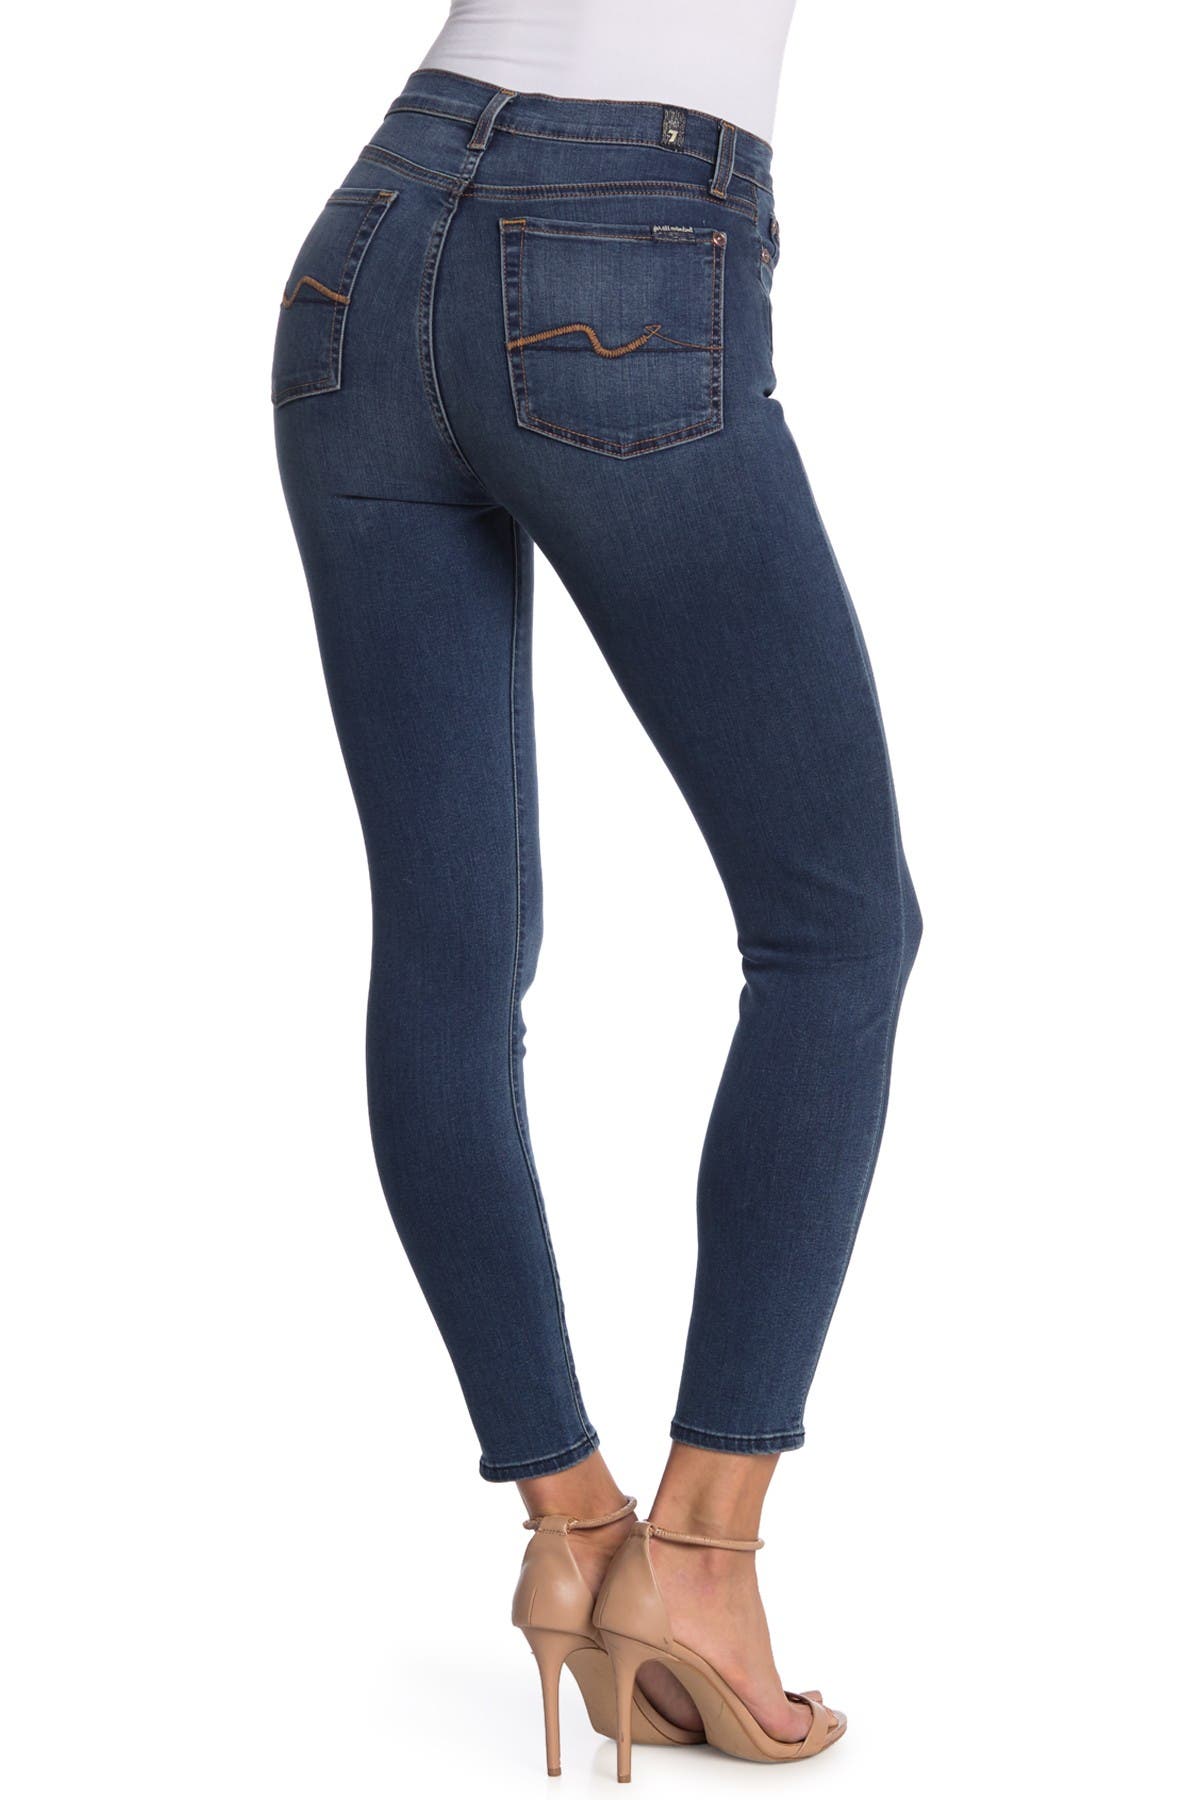 7 For All Mankind | High Waist Ankle Gwenevere Skinny Jeans | Nordstrom ...